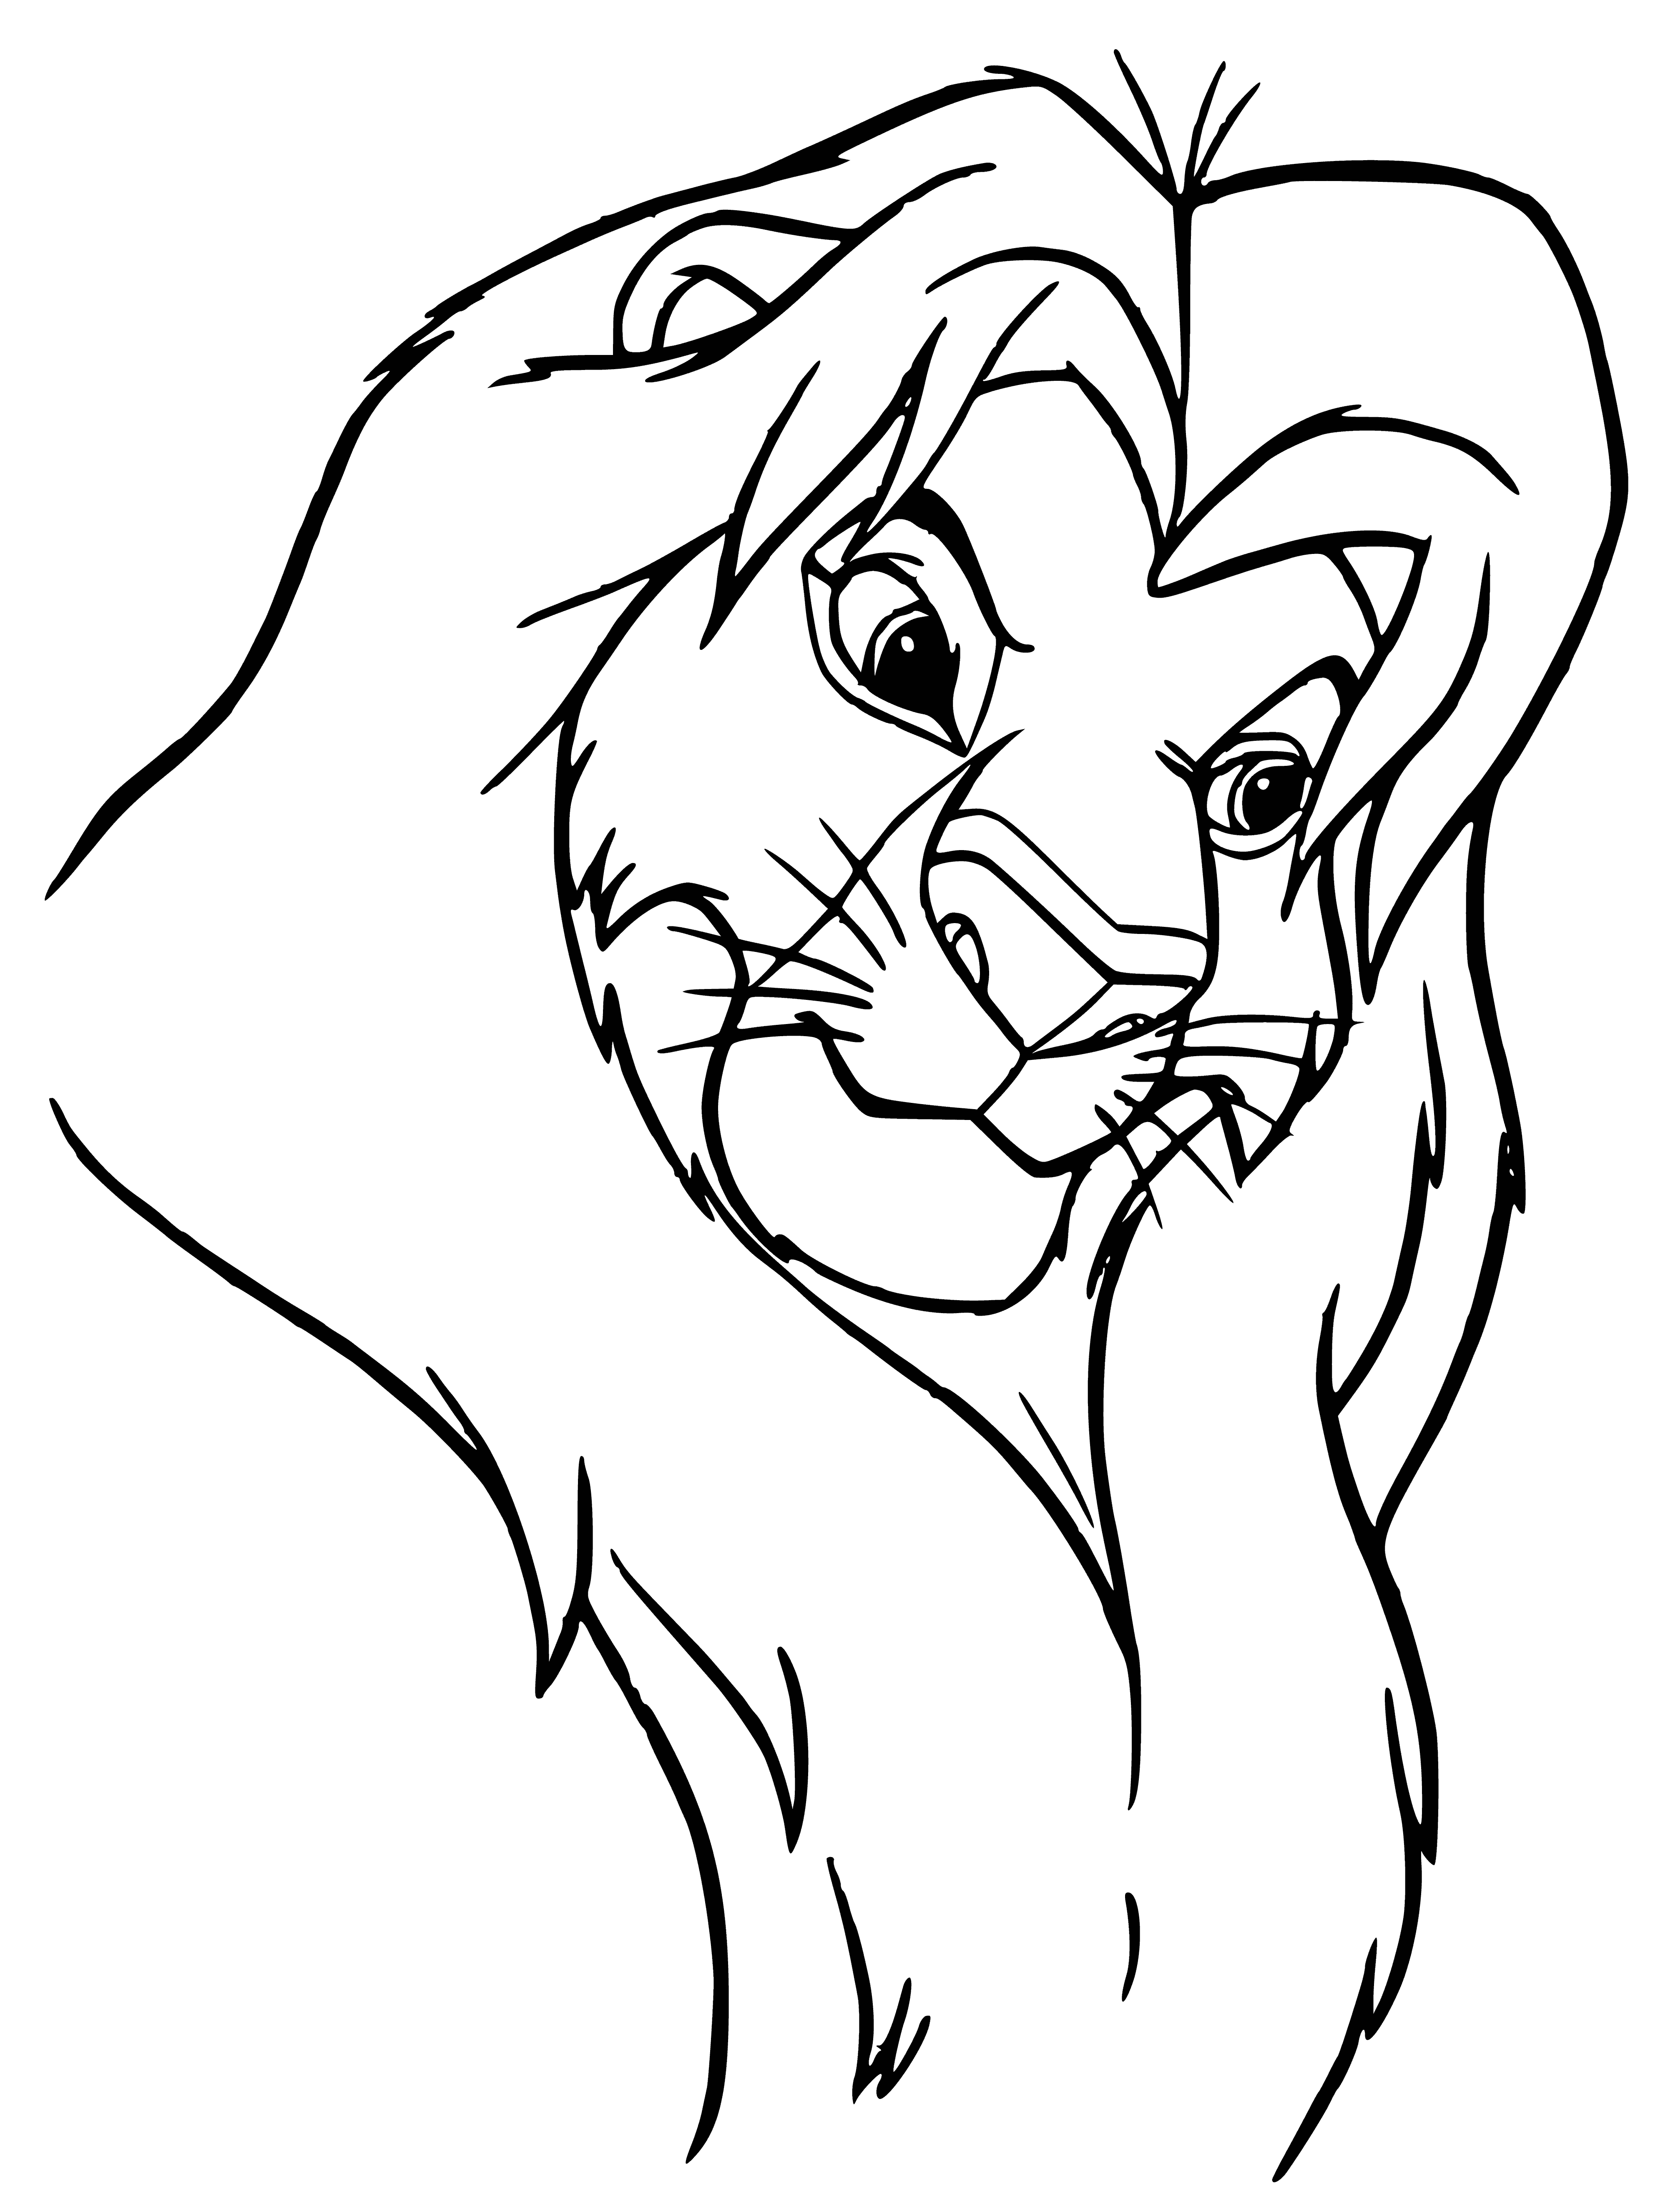 coloring page: Simba follows in his father's footsteps to become the beloved king of the Pride Lands. #TheLionKing #Disney